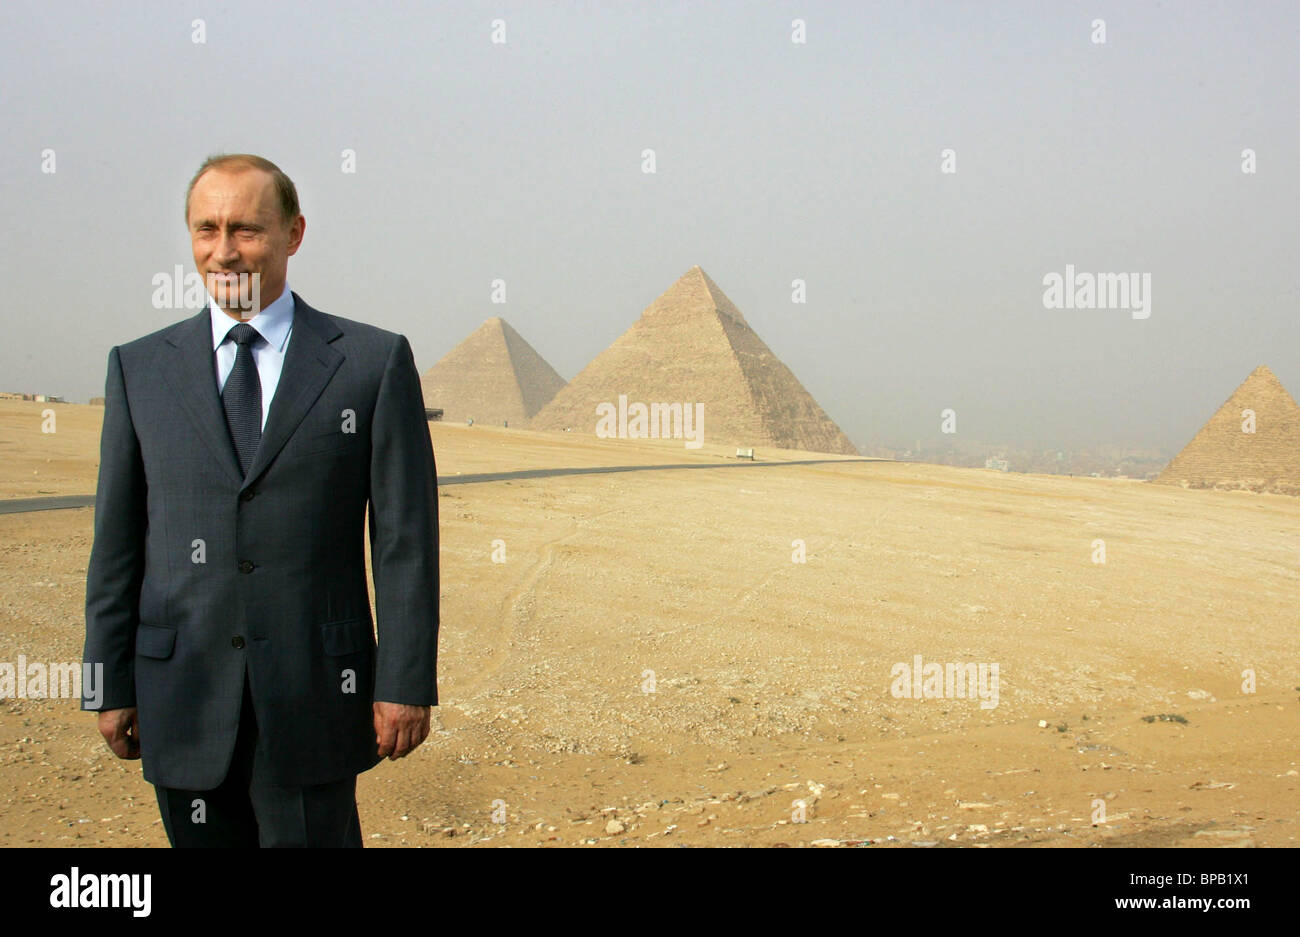 russian-presidents-visit-to-egypt-goes-on-BPB1X1.jpg